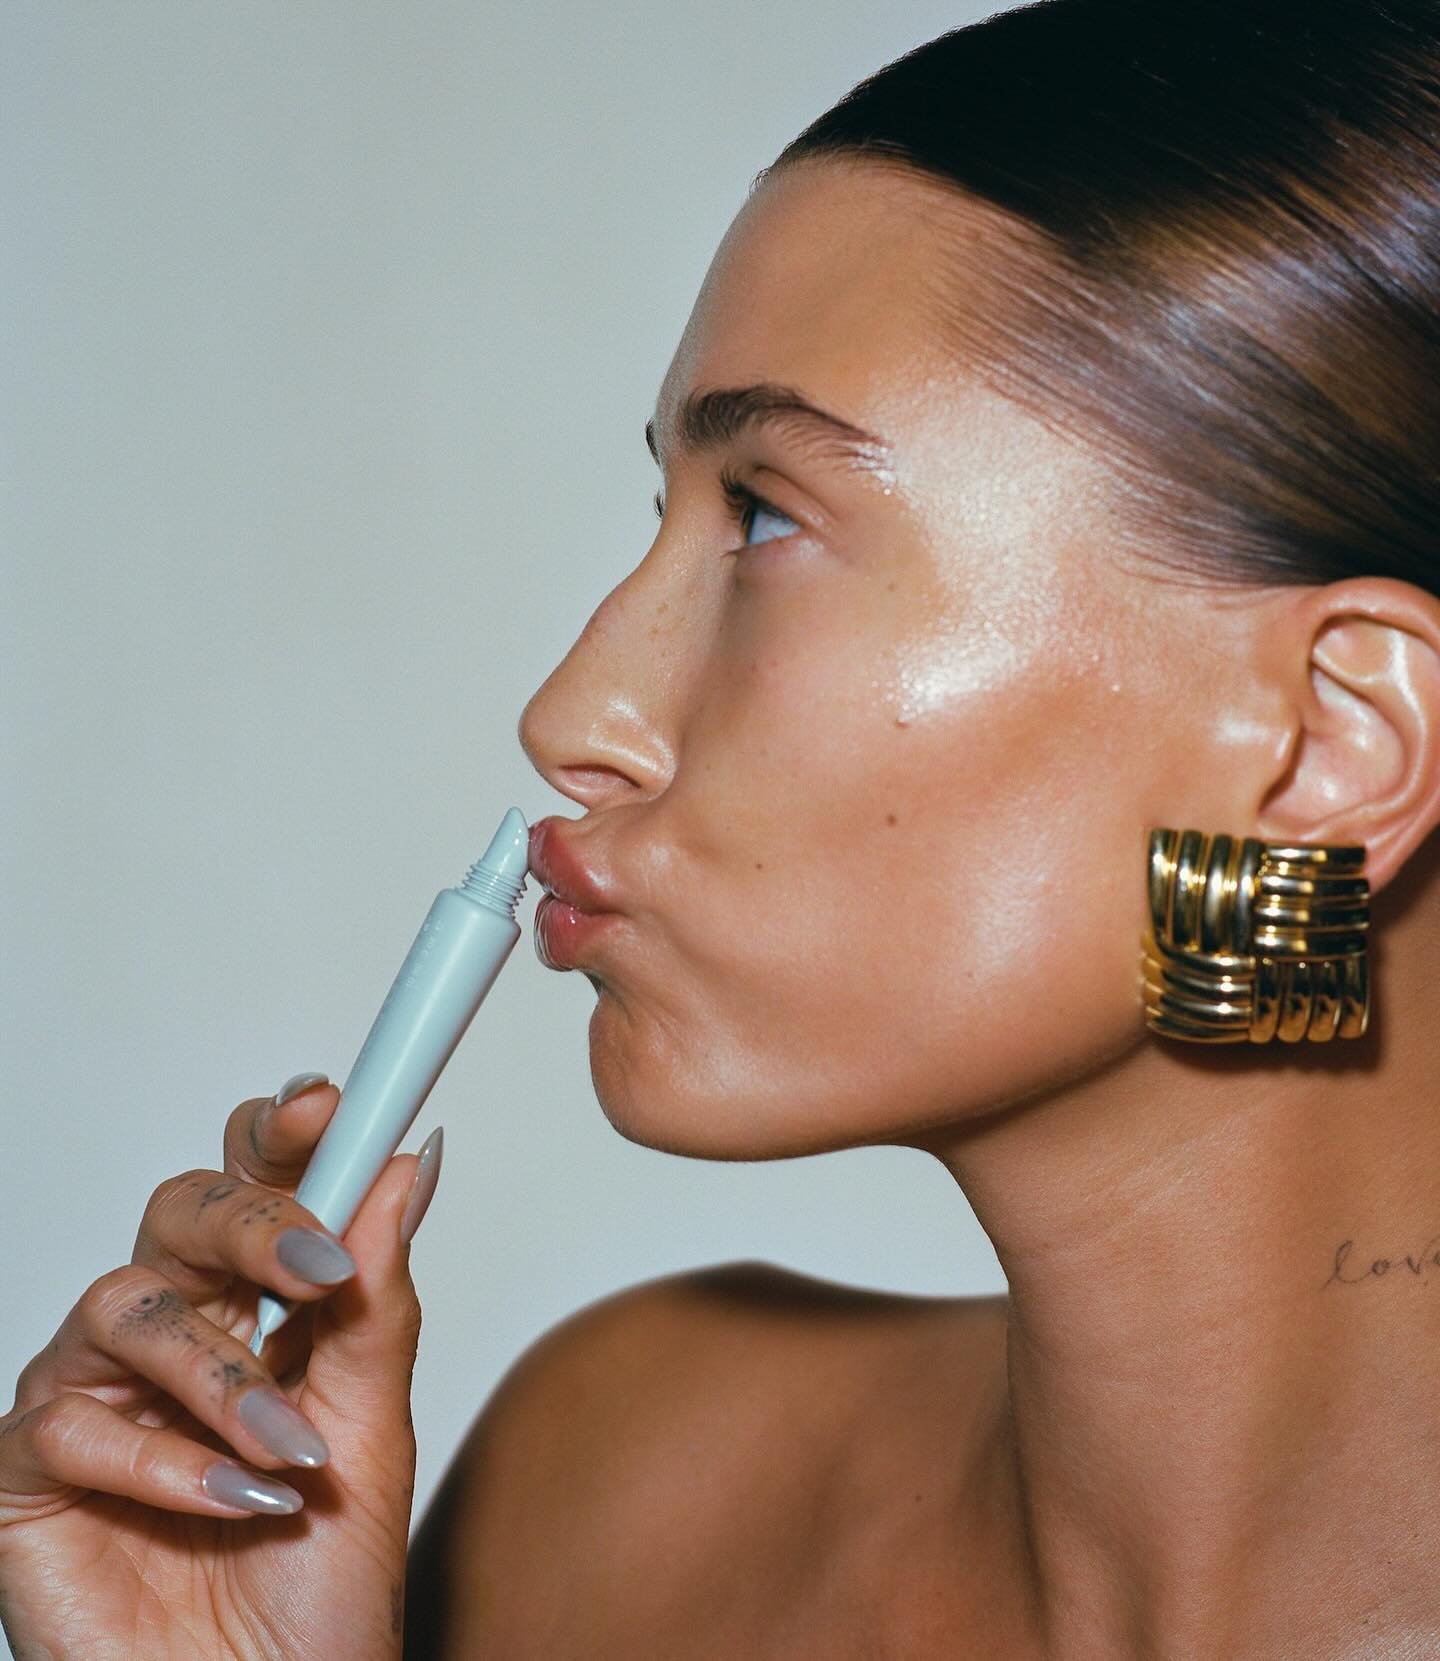 Team saves&hellip; 
Abbie: &ldquo;Vintage jewellery is having a moment. More contemporary brands are embracing the vintage styles. And lets face it&hellip; anything with @haileybieber in, we&rsquo;re obsessed with&rdquo; 

Leah: &ldquo;My most sought